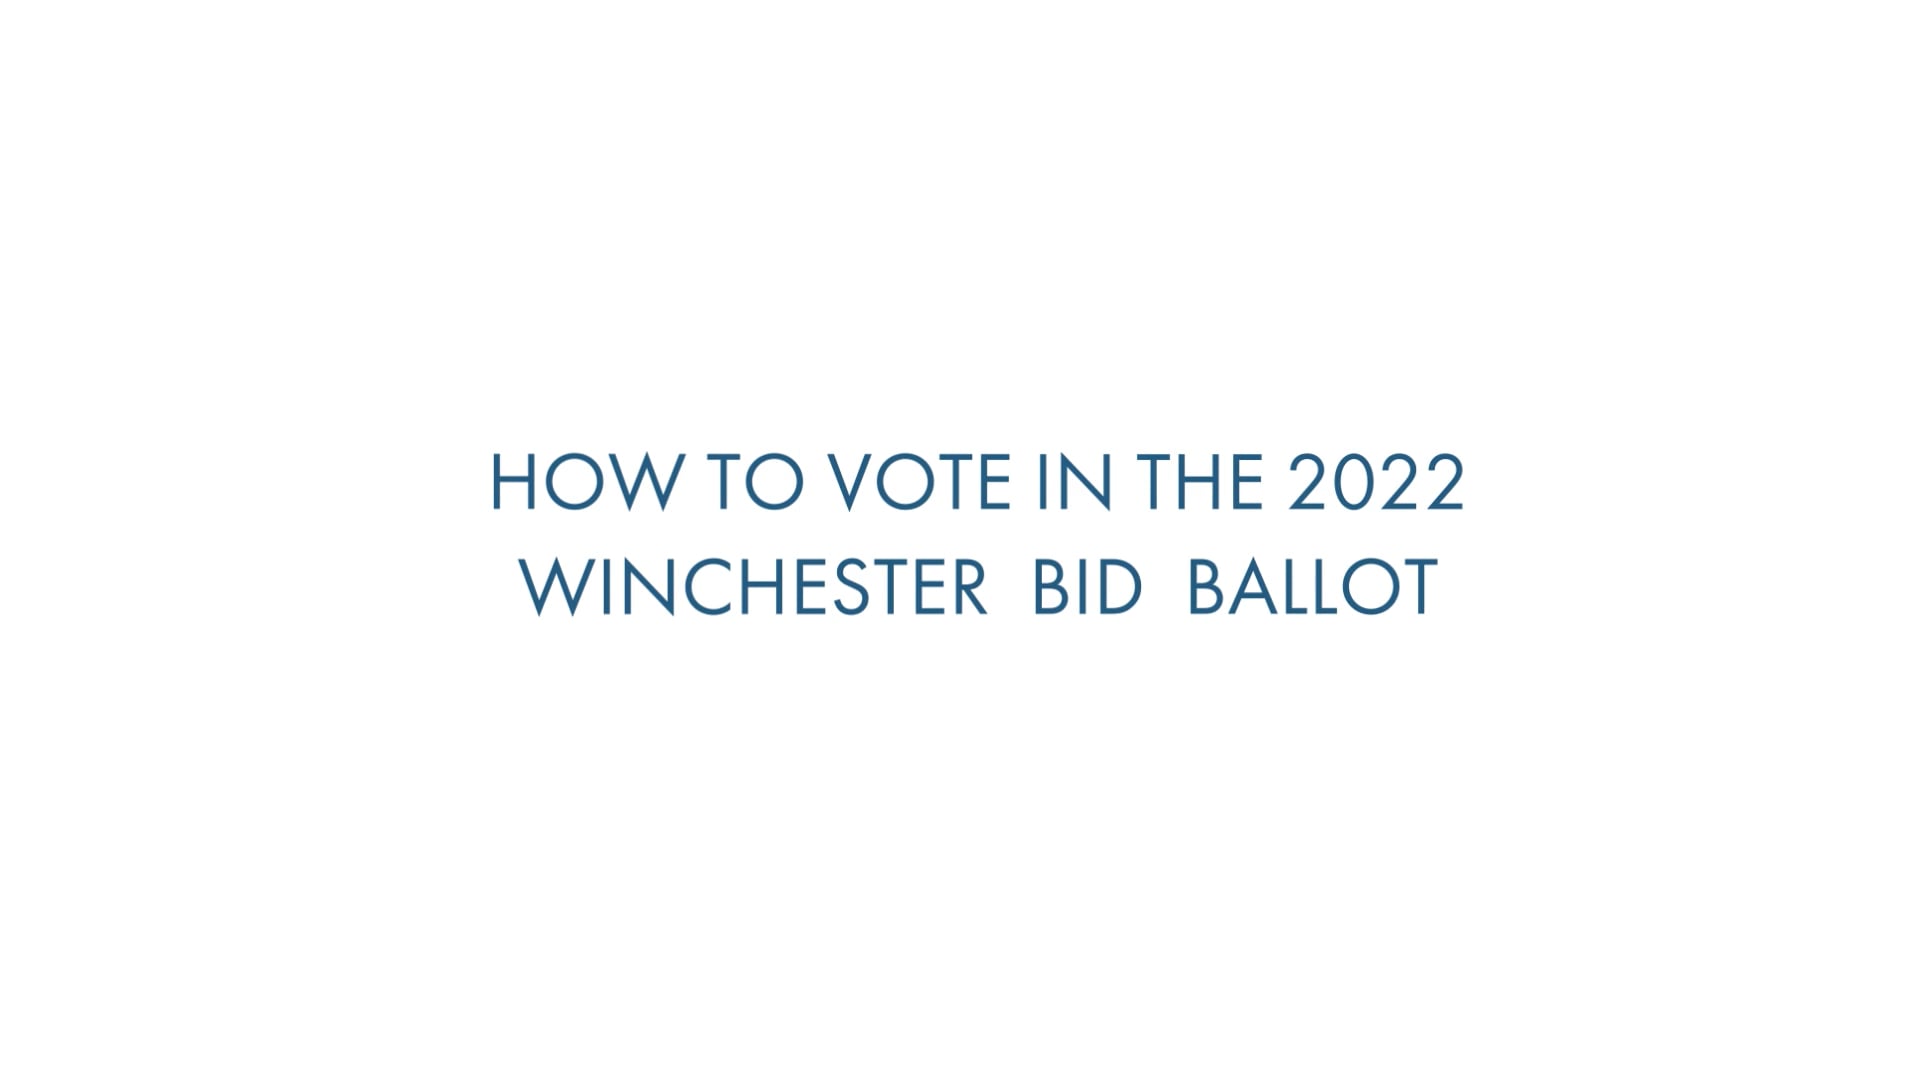 How To Vote In The 2022 Winchester Bid Ballot